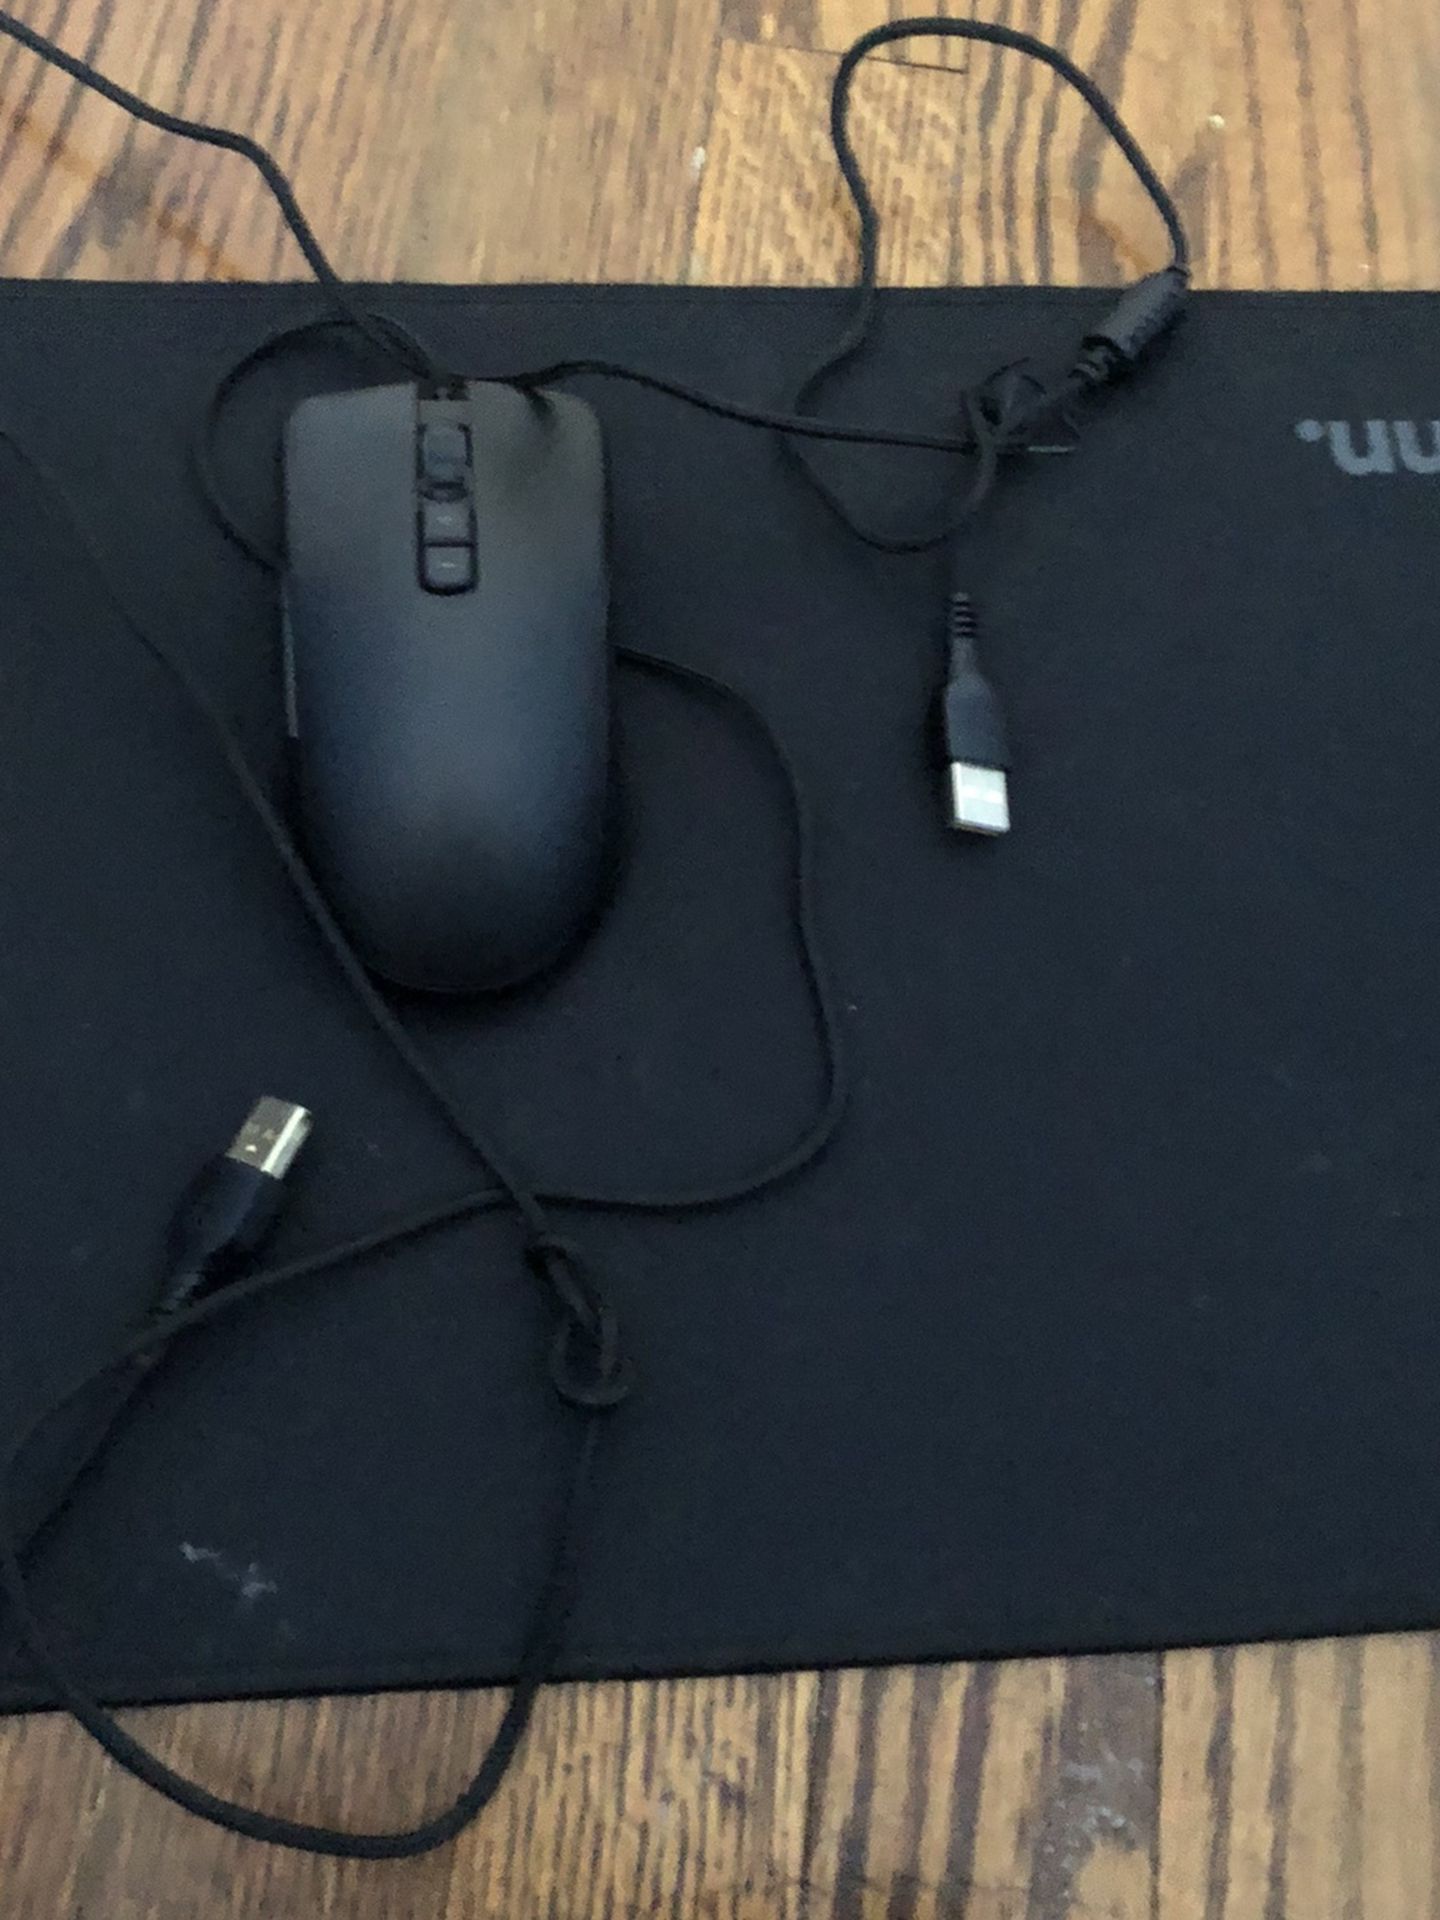 Wired Mouse And Keyboard In Brand New Condition With Lights On Them